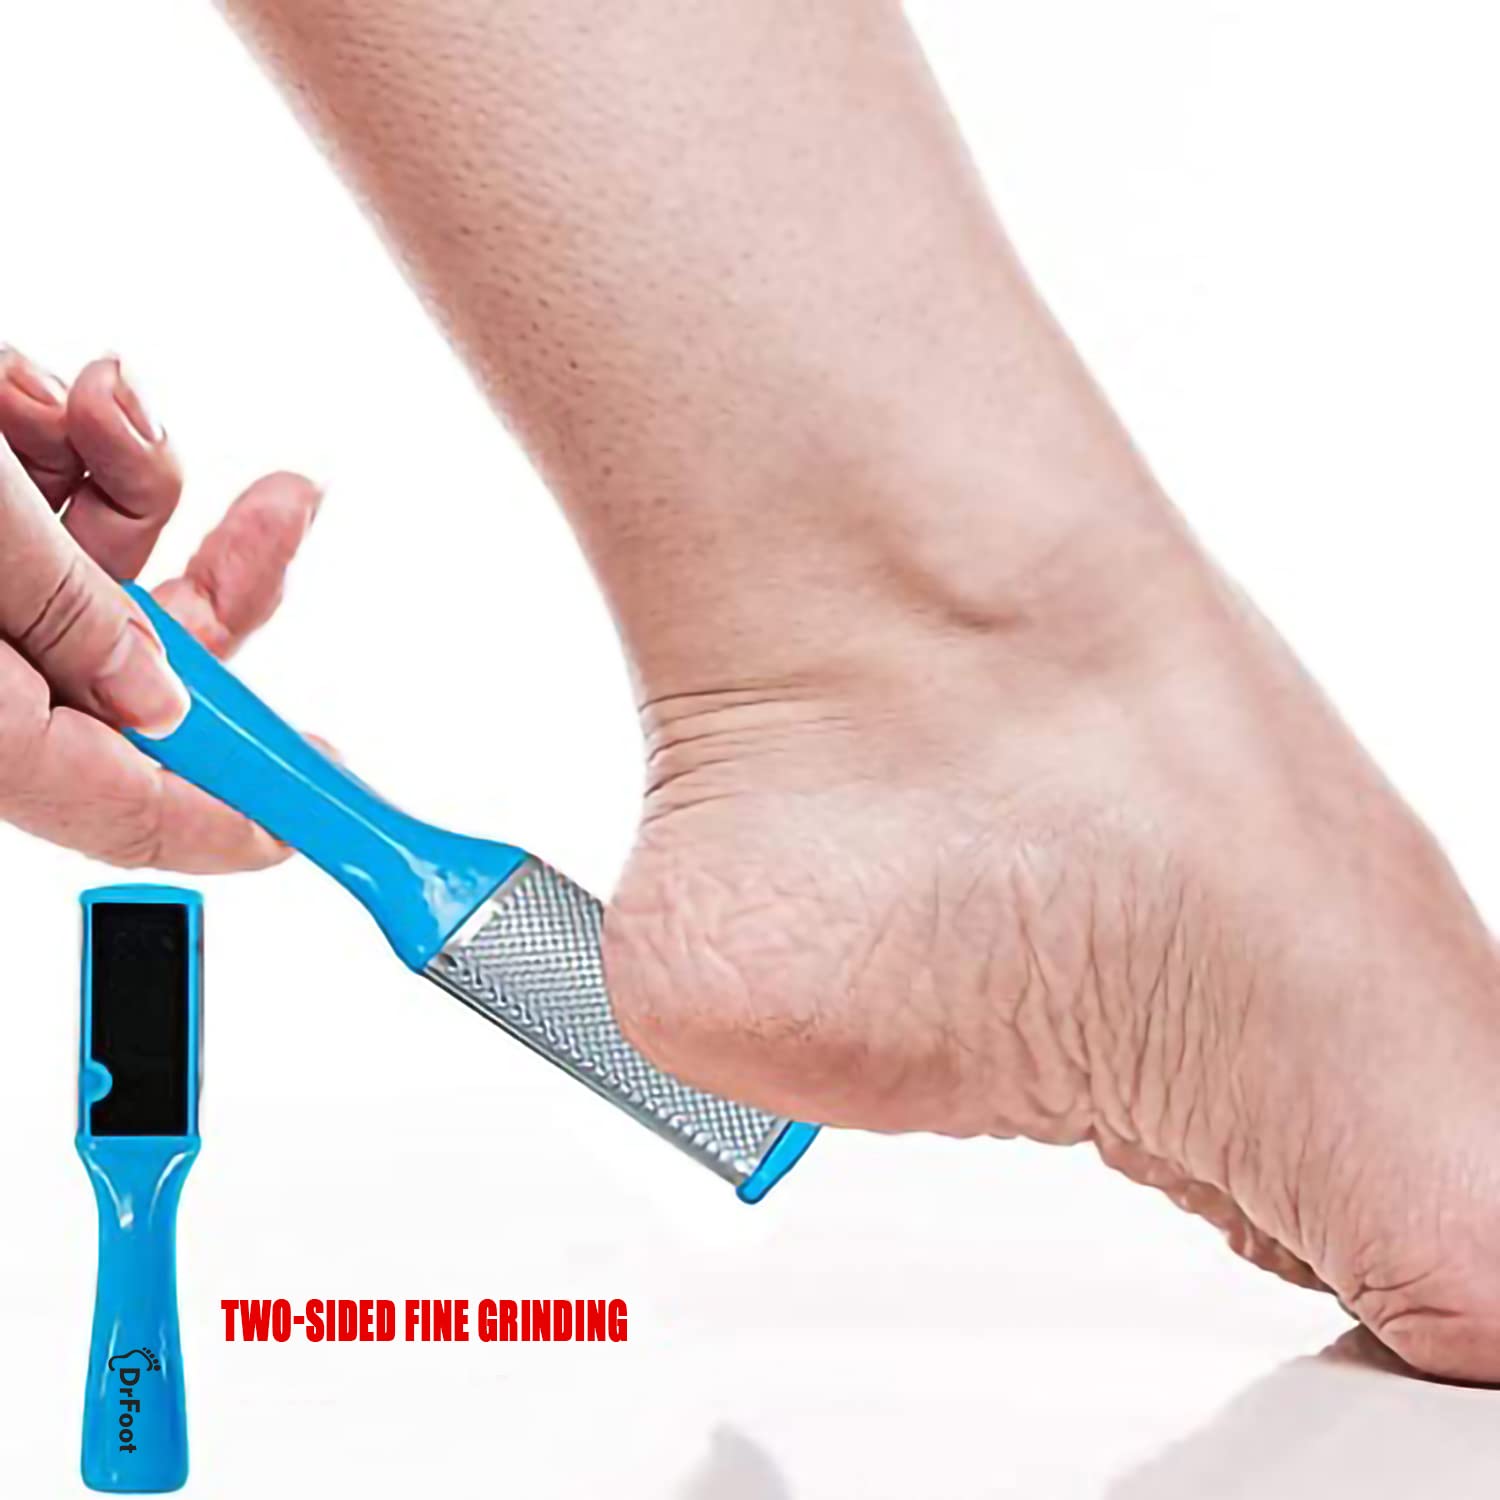 Dr Foot Callus Remover Gel Helps to remove Calluses and Corns also –  Drfootin